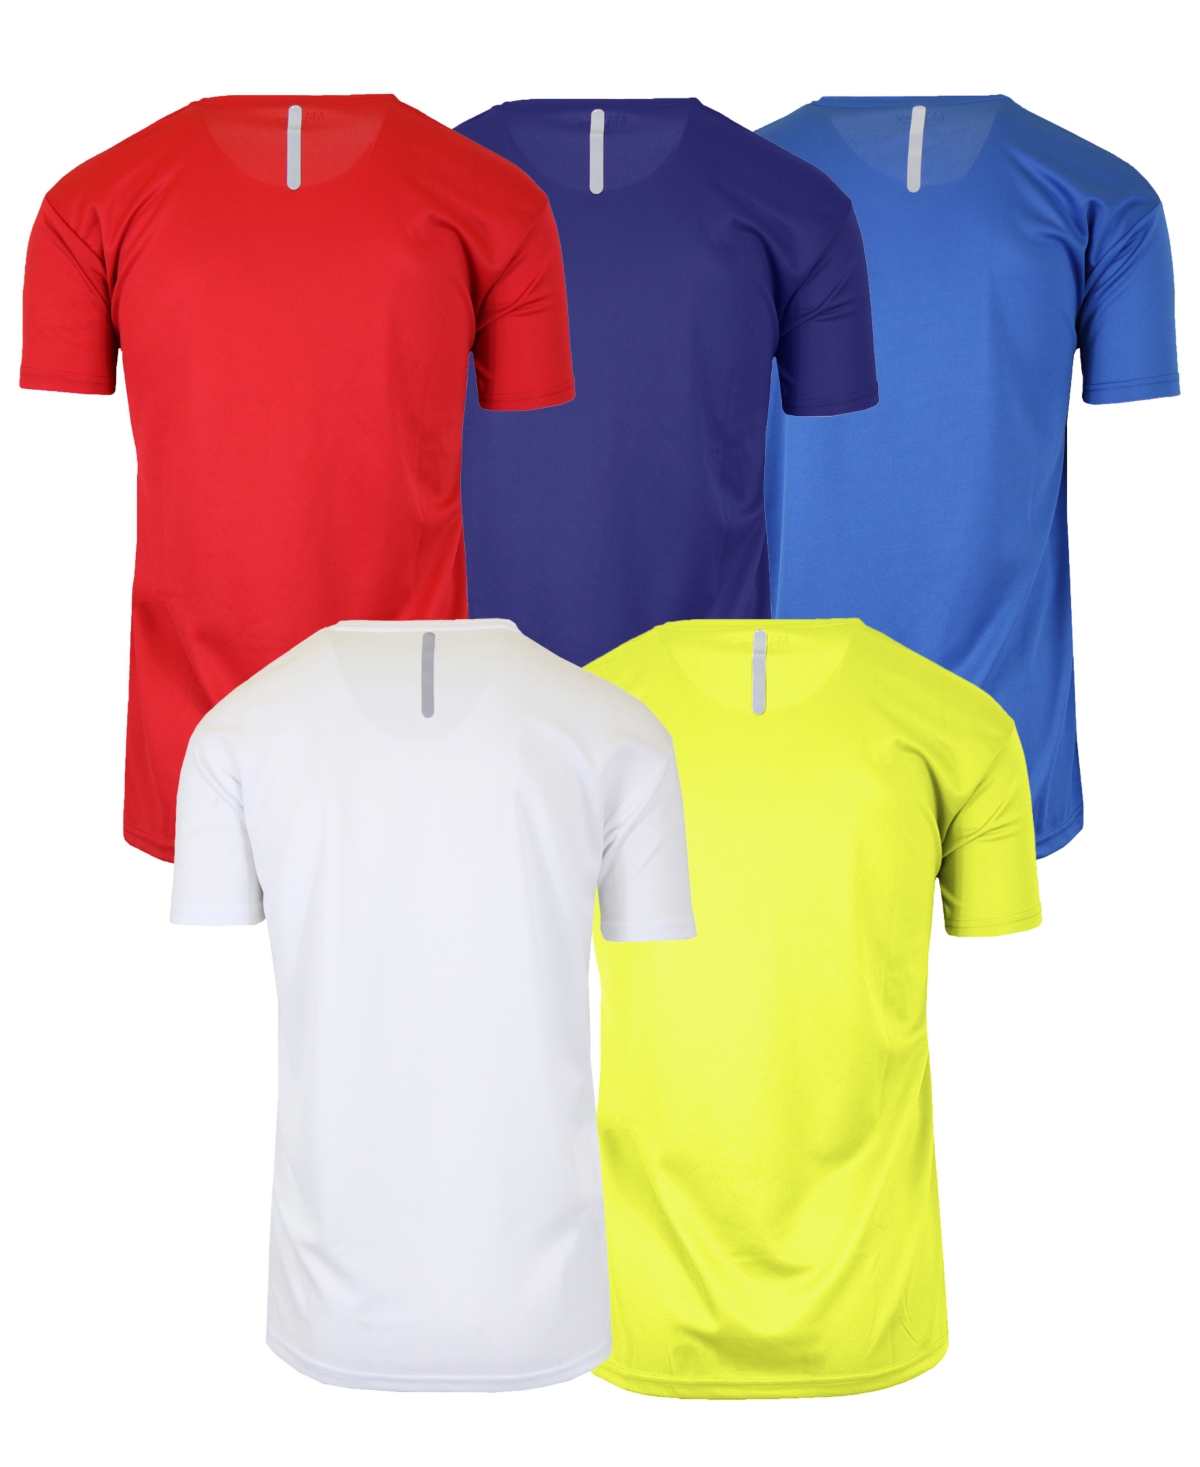 Shop Galaxy By Harvic Men's Short Sleeve Moisture-wicking Quick Dry Performance Crew Neck Tee -5 Pack In Navy Multi